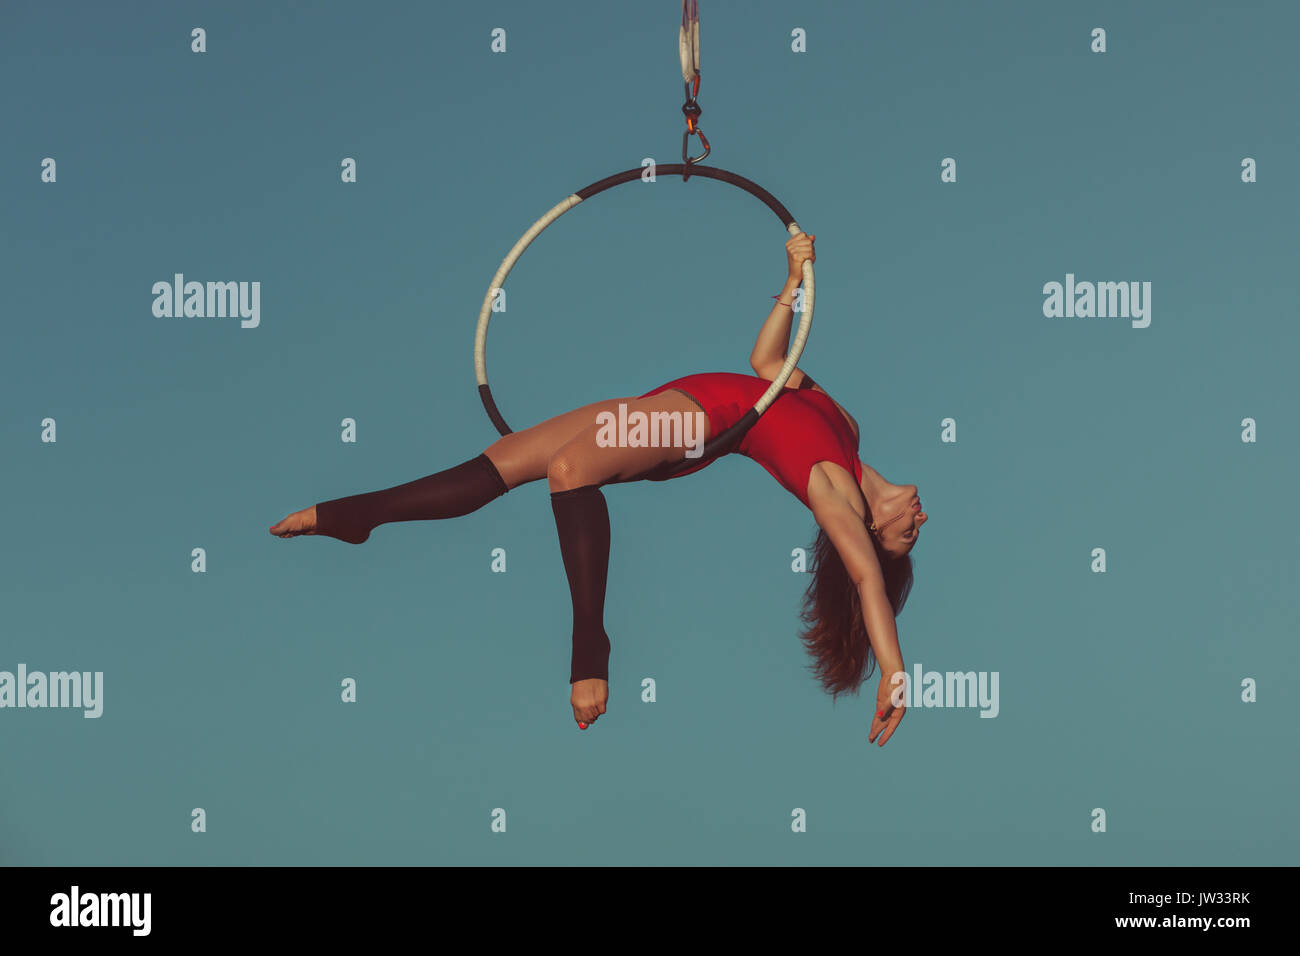 Woman is an aerial acrobat, she demonstrates the show on the hoop. Stock Photo